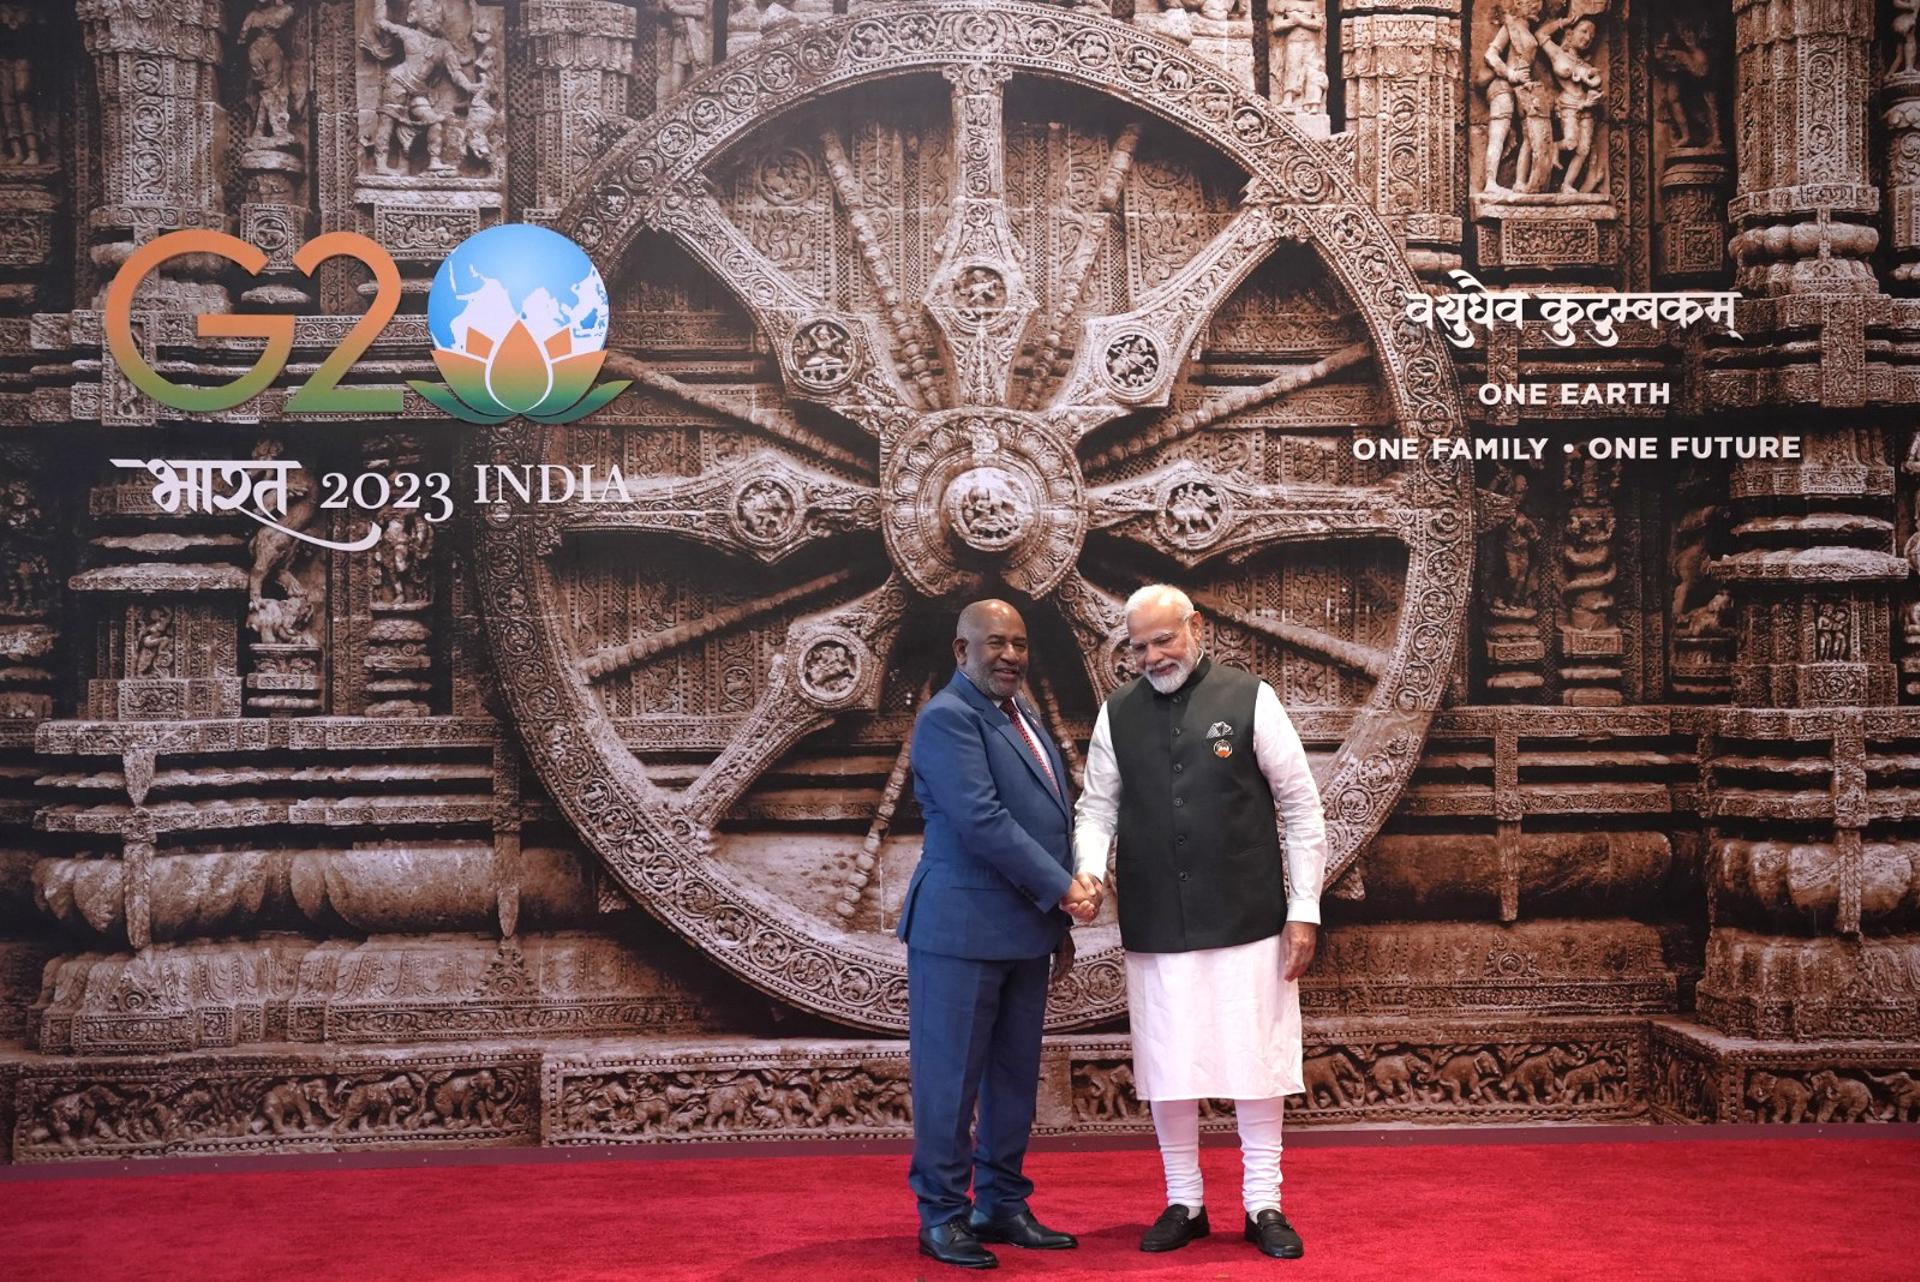 A handout photo made available by the Ministry of External Affairs (MEA) of India shows Indian Prime Minister Narendra Modi (R) welcoming President of the Union of Comoros and Chairperson of the African Union Azali Assoumani for the G20 Summit at Bharat Mandapam at ITPO Convention Centre Pragati Maidan in New Delhi, India, 09 September 2023. EFE/EPA/INDIAN MINISTRY OF EXTERNAL AFFAIRS / HANDOUT HANDOUT EDITORIAL USE ONLY/NO SALES
